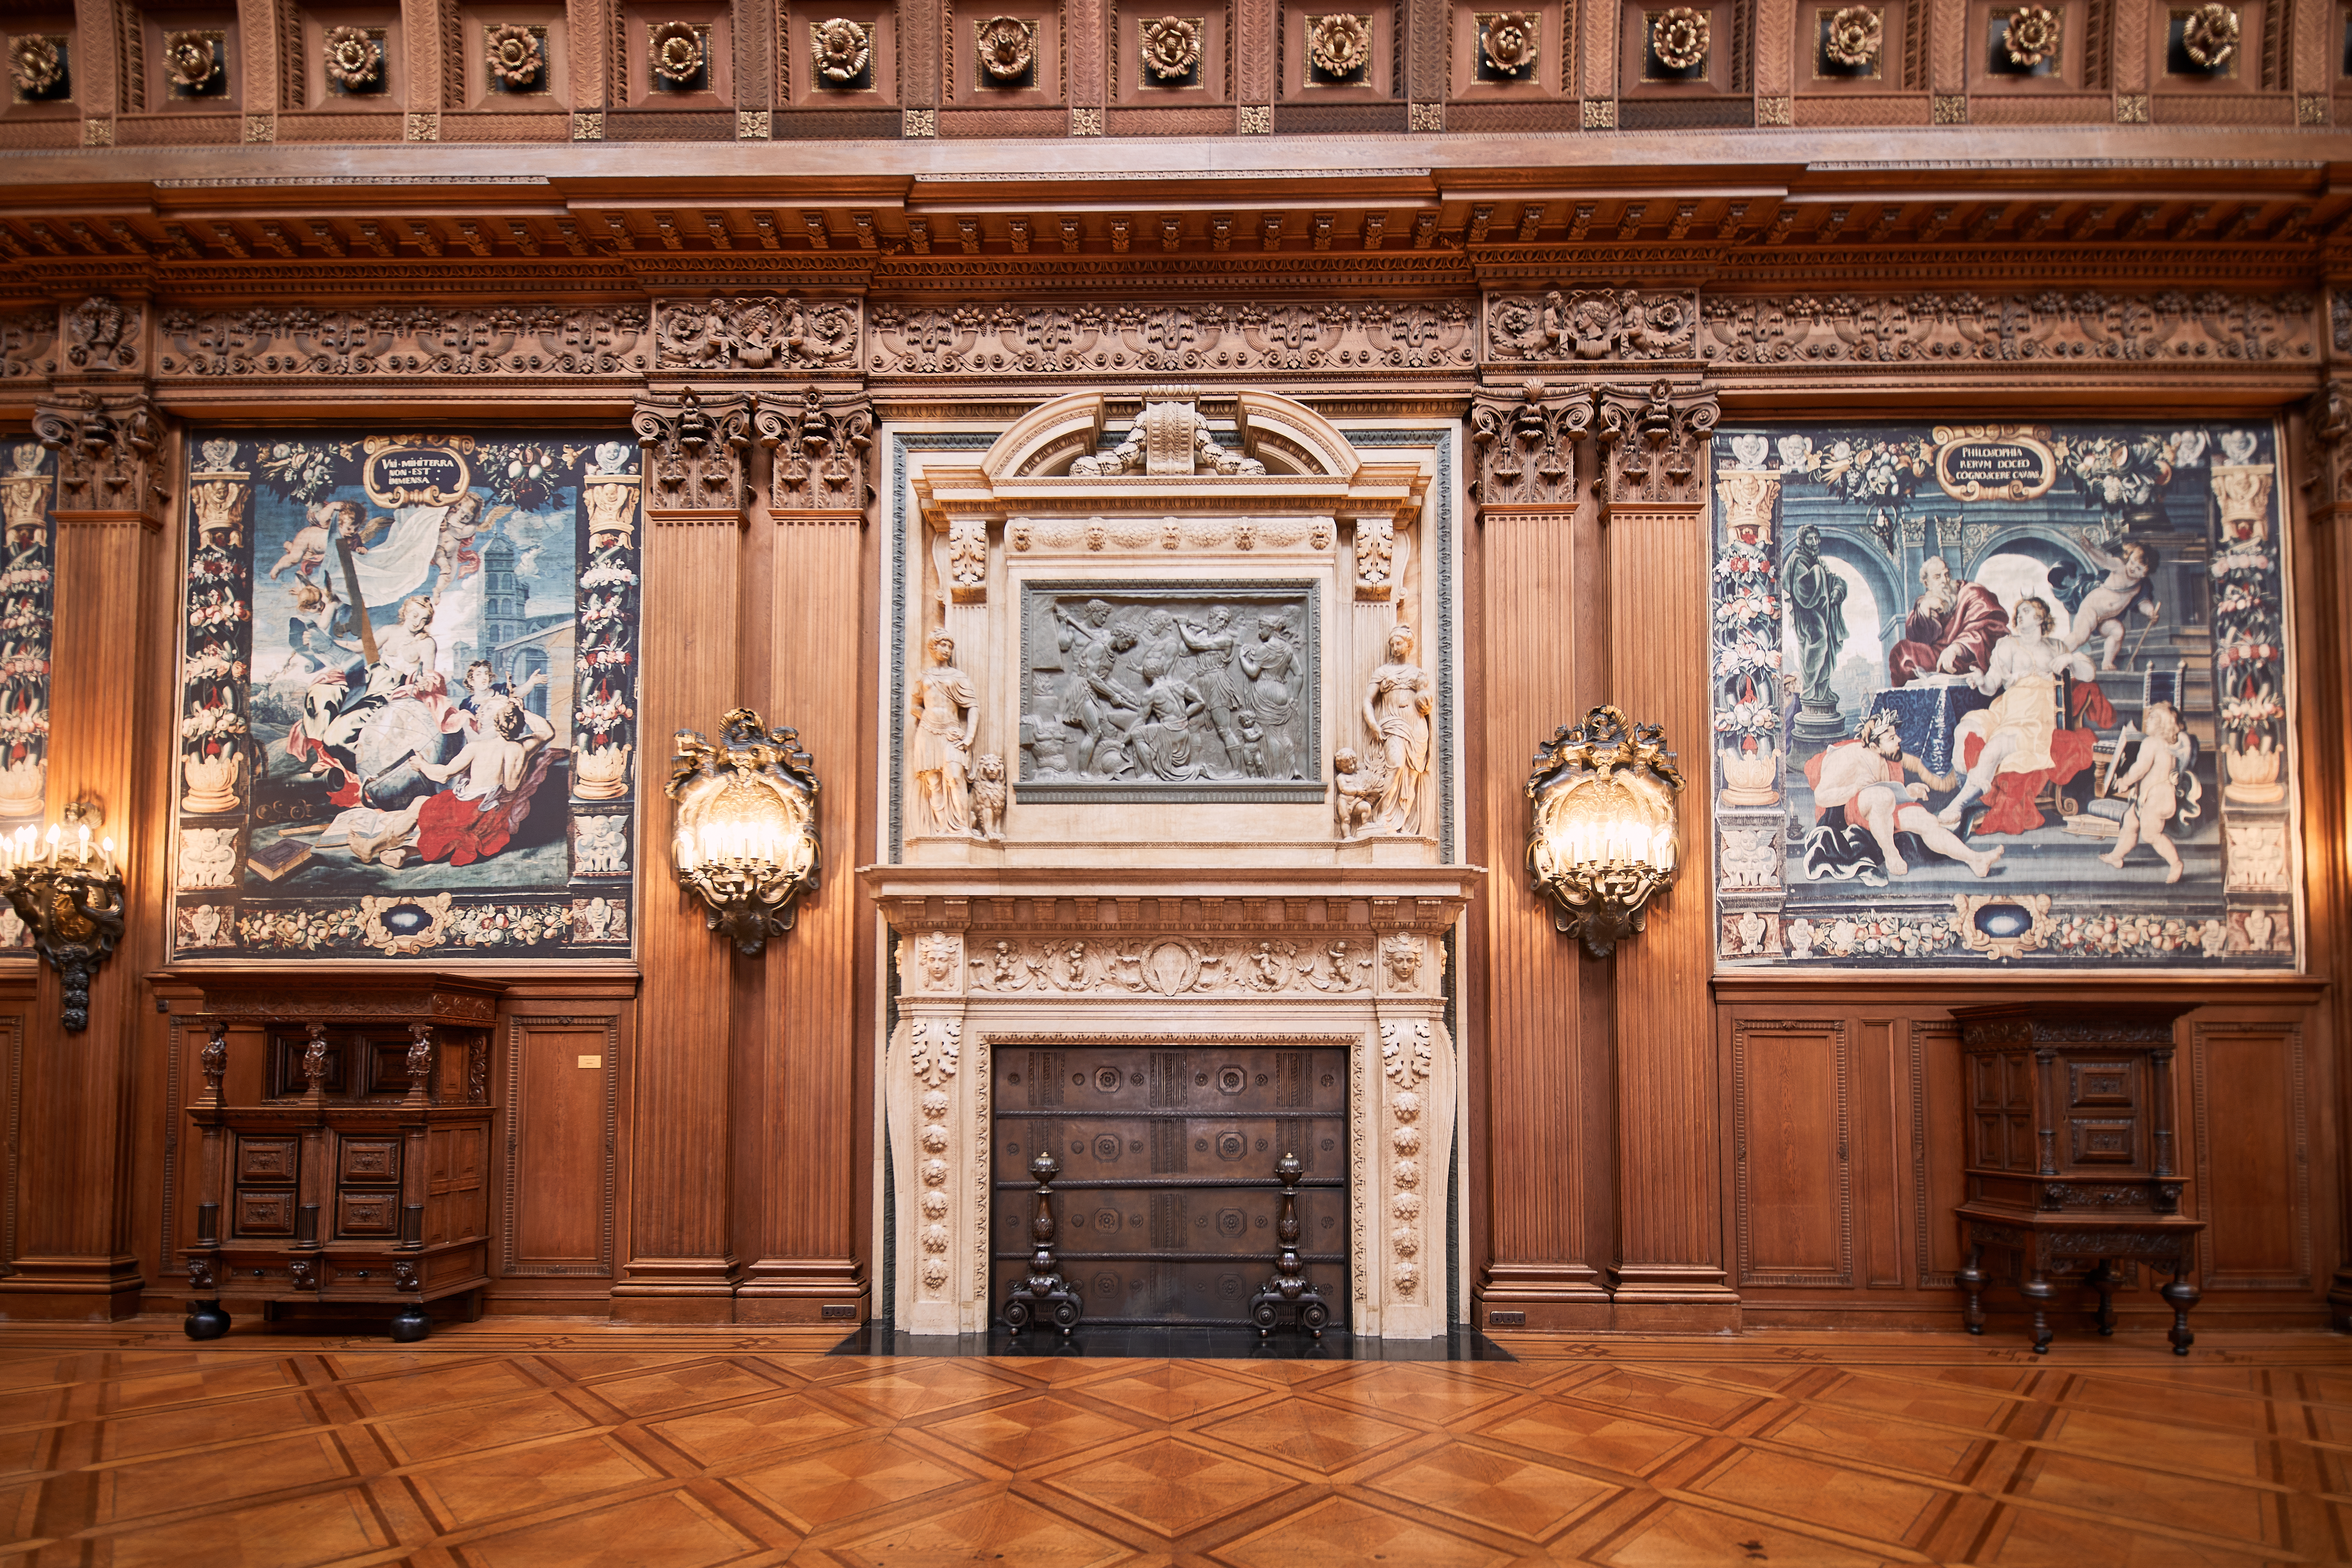 The Upper Hall of Villa Hügel, with its opulent fireplace and tapestry series “The Seven Liberal Arts”, is also used today for concerts and events. – ©Krupp-Stiftung/ Peter Gwiazda